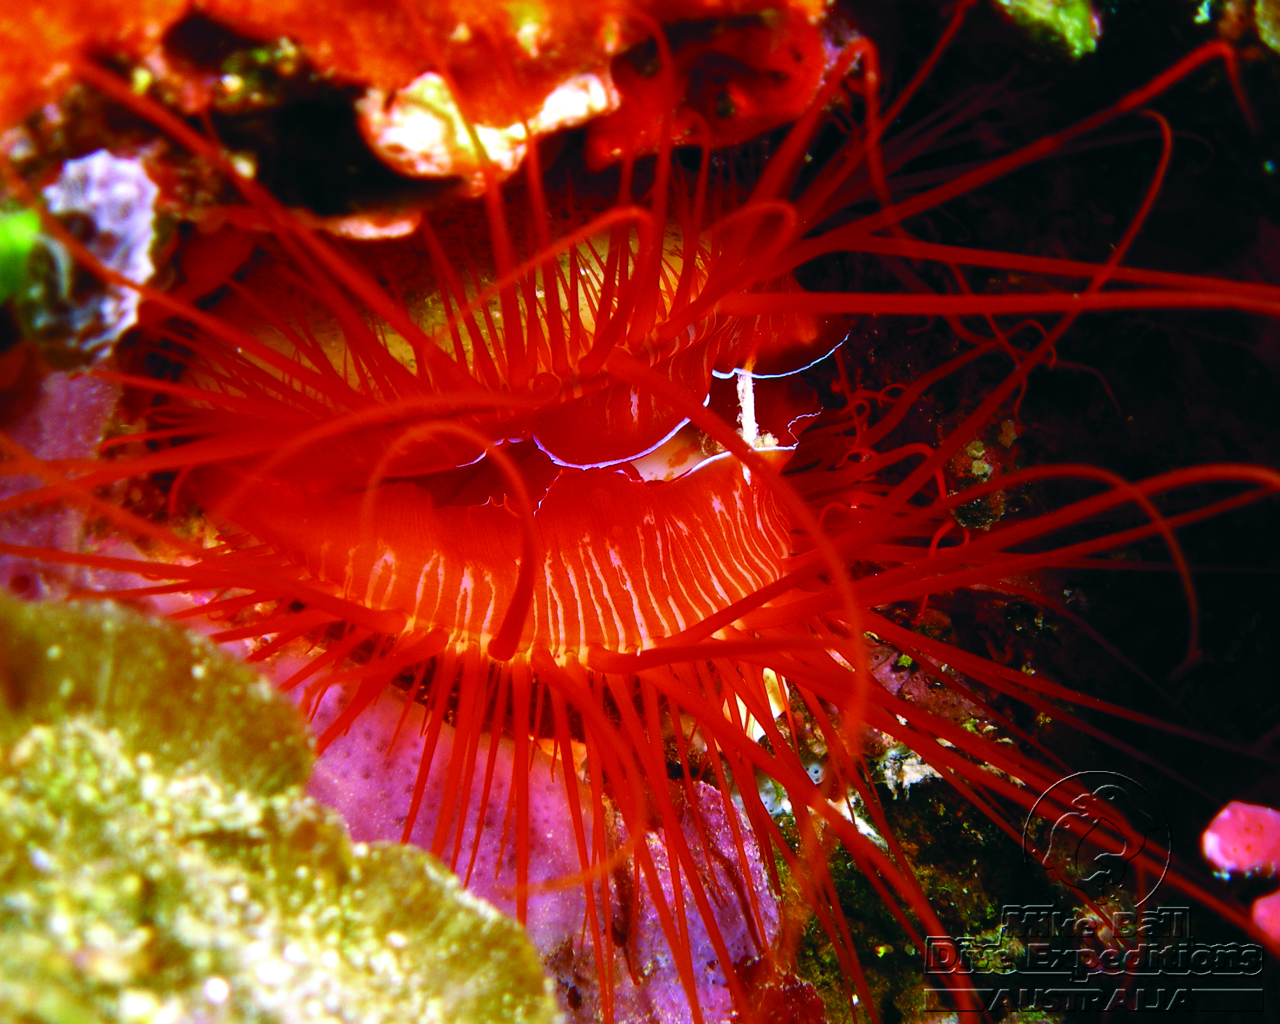 A flame file shell at Steve's Bommie. Photo Courtesy of Mike Ball Dive Expeditions